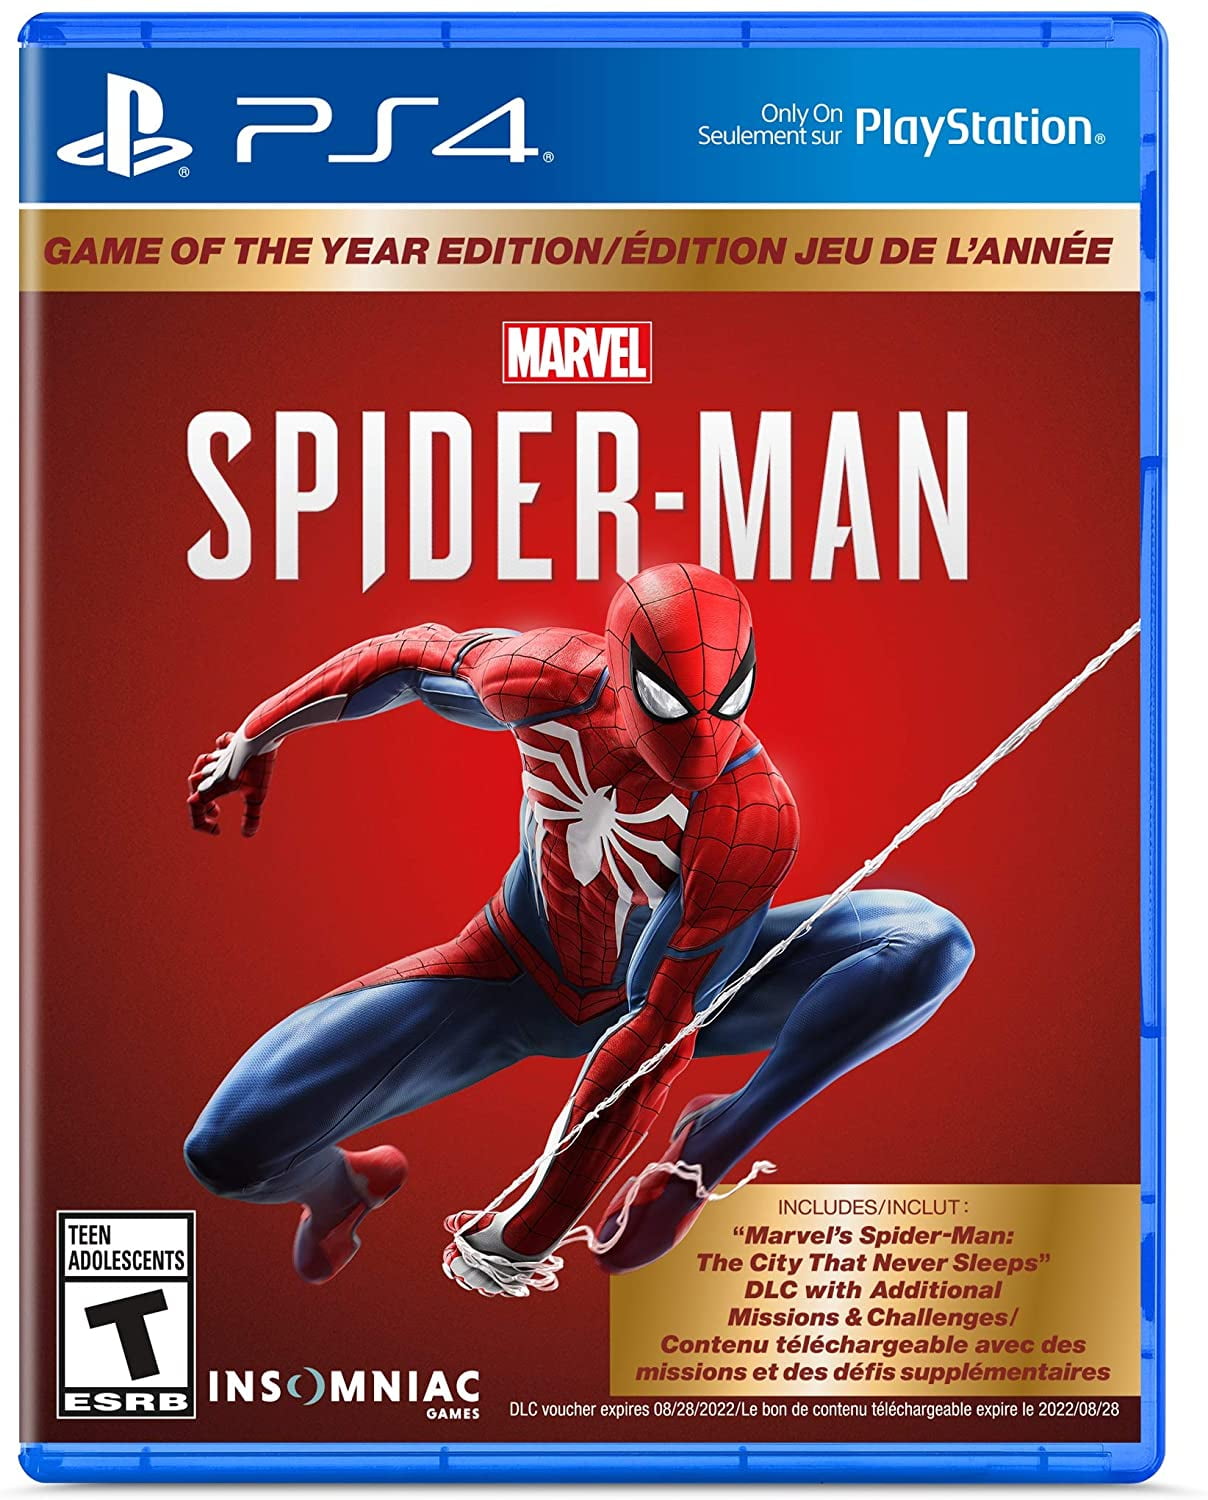 Marvel's Spider-Man: Game Year Edition - PlayStation 4